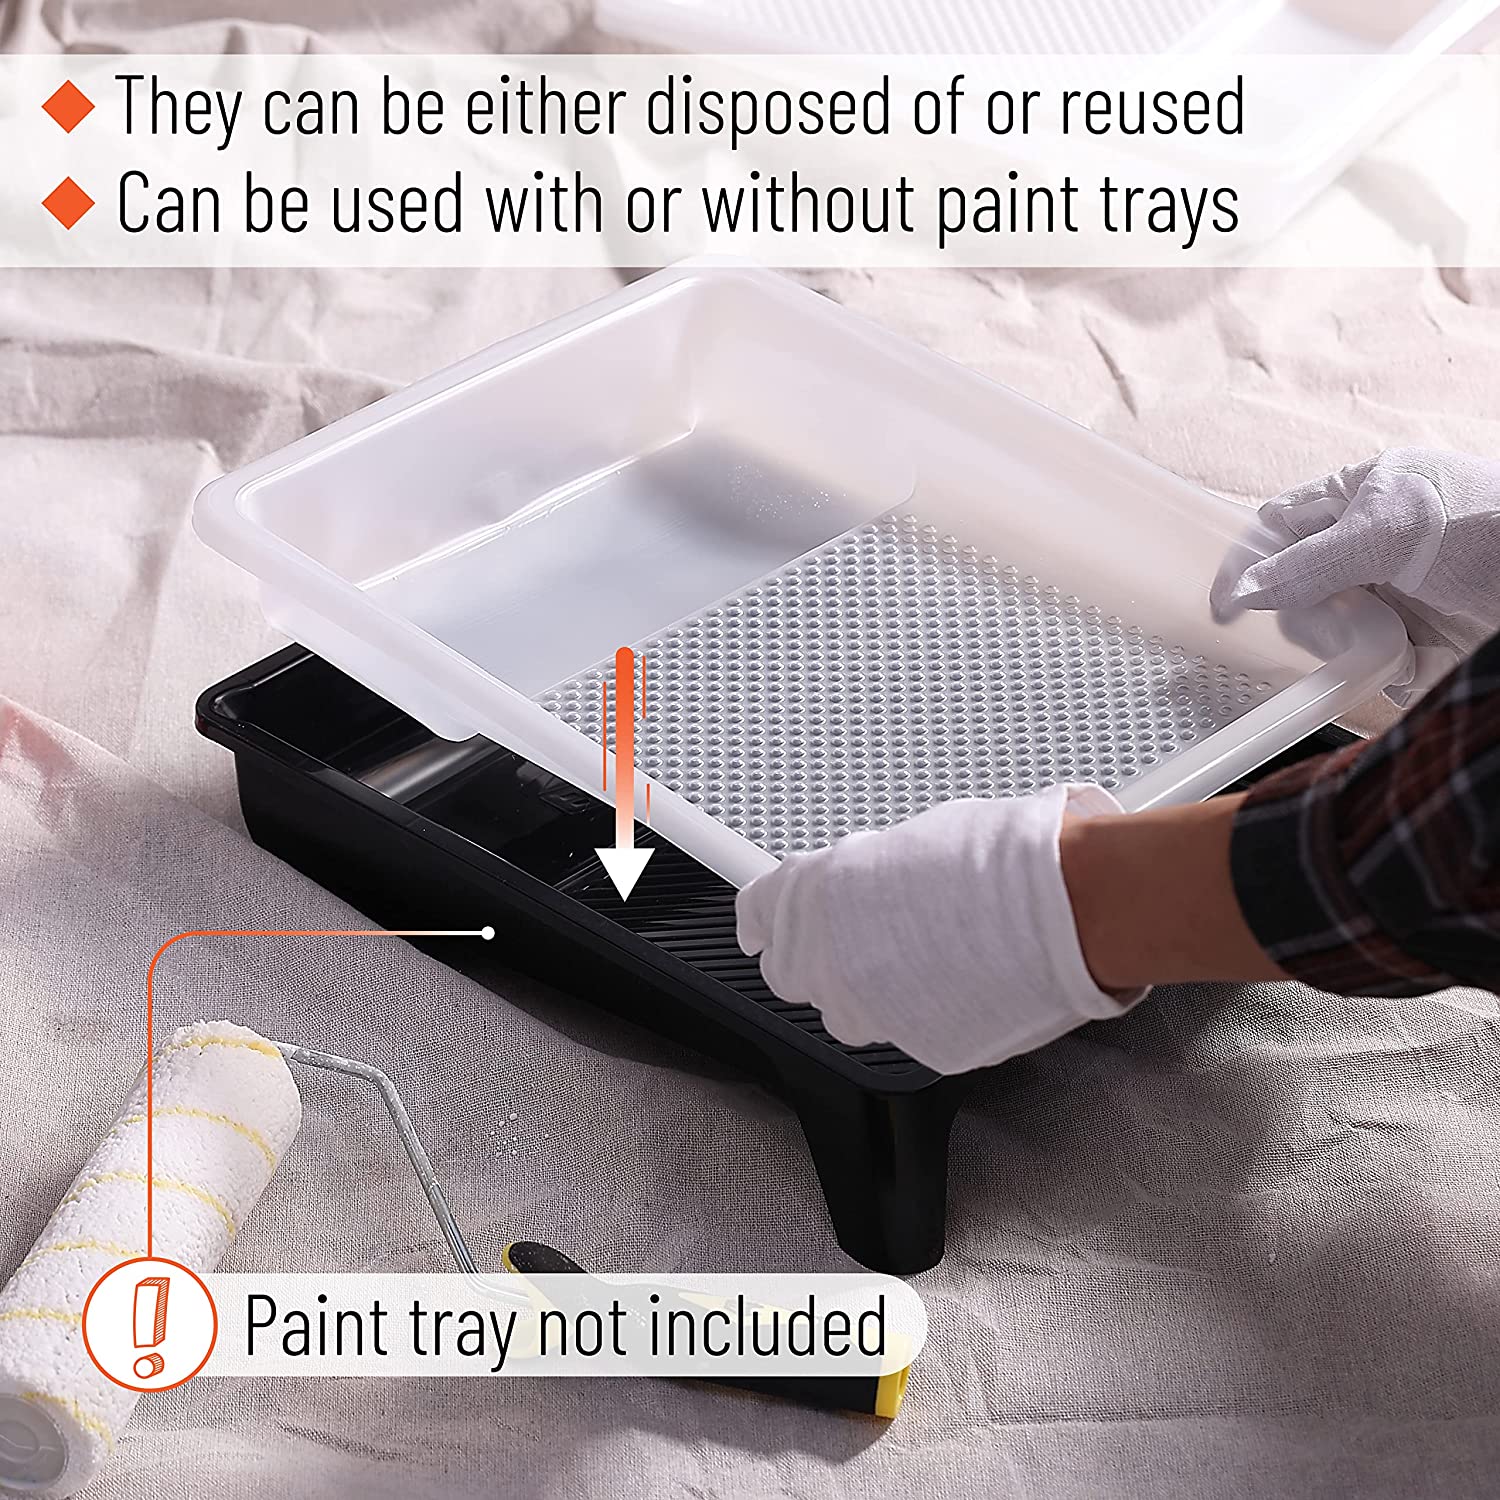 Disposable Paint Tray Liner